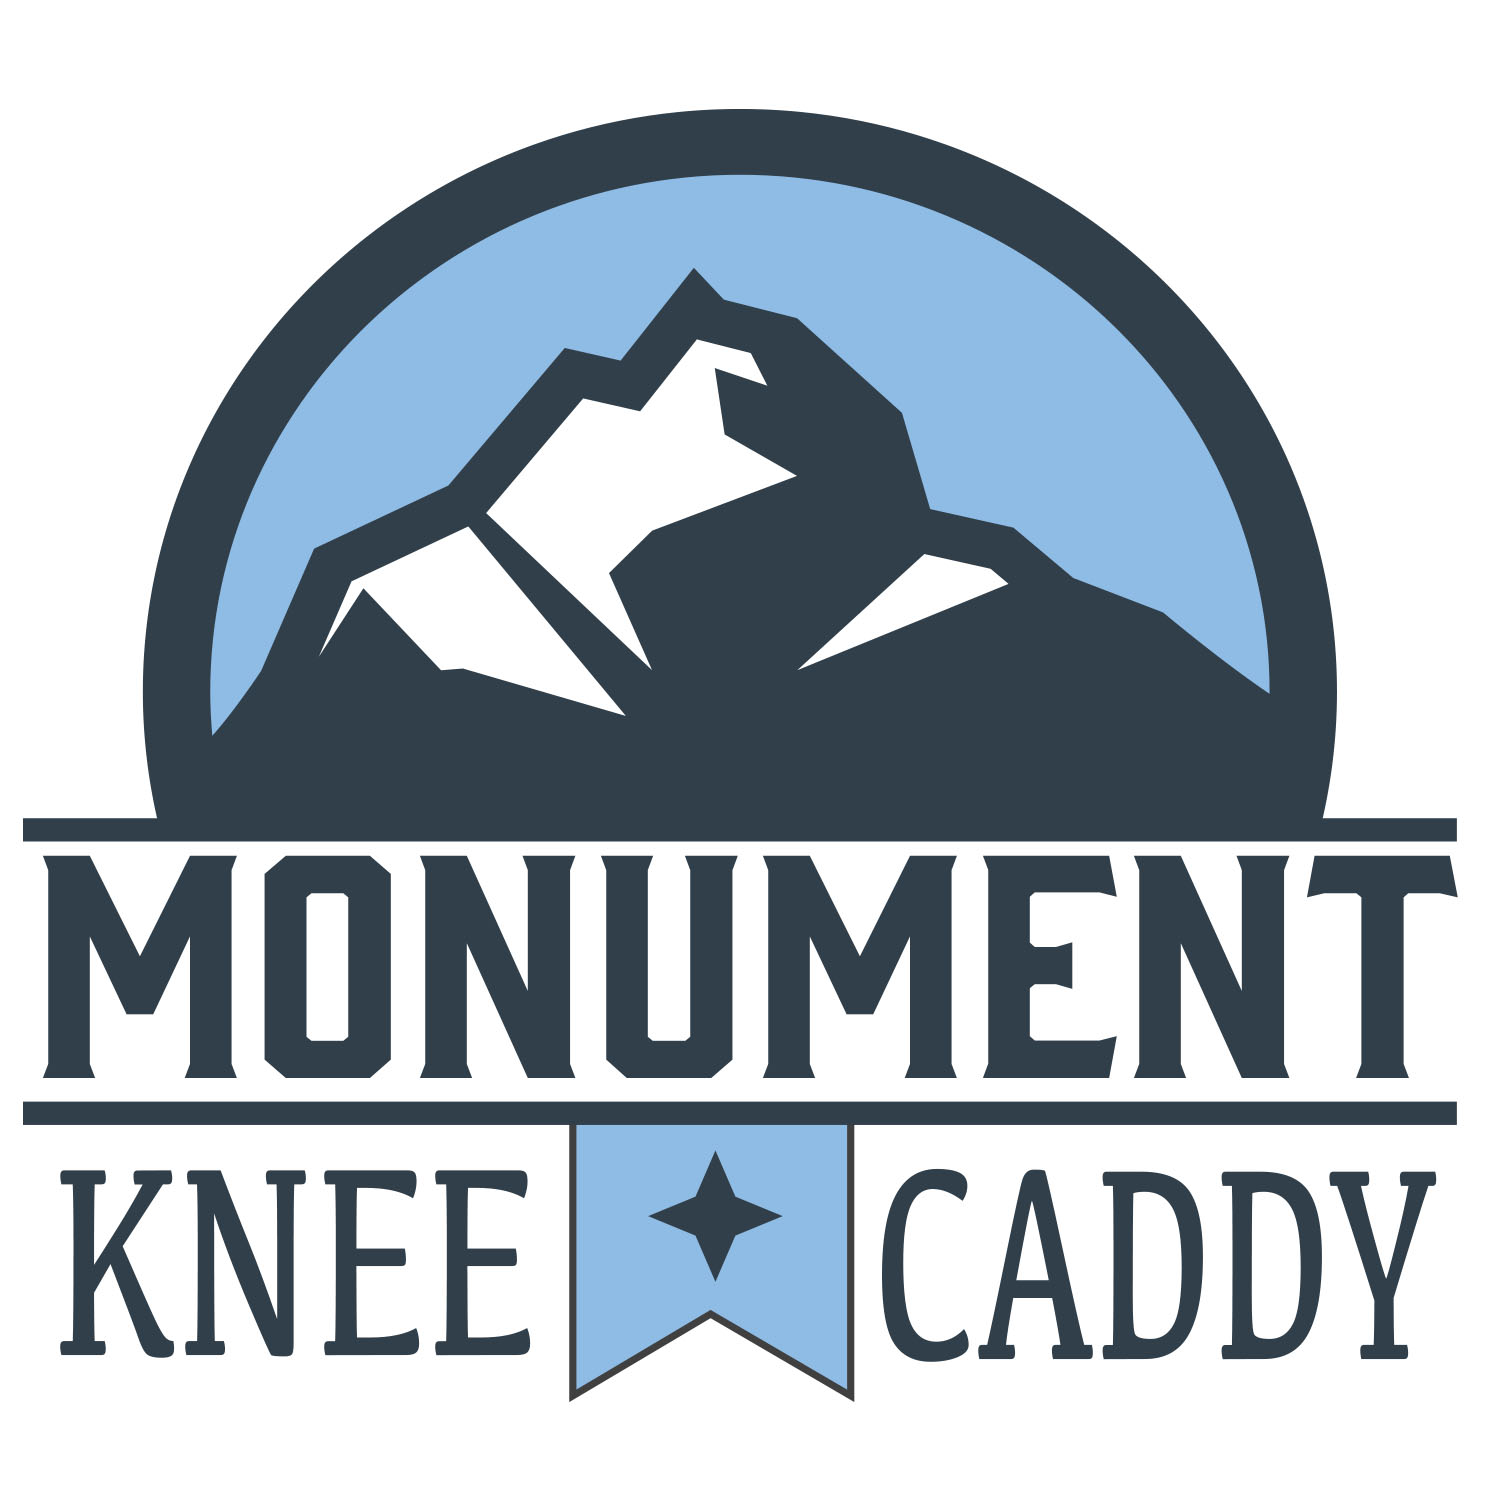 MONUMENT KNEE CADDY